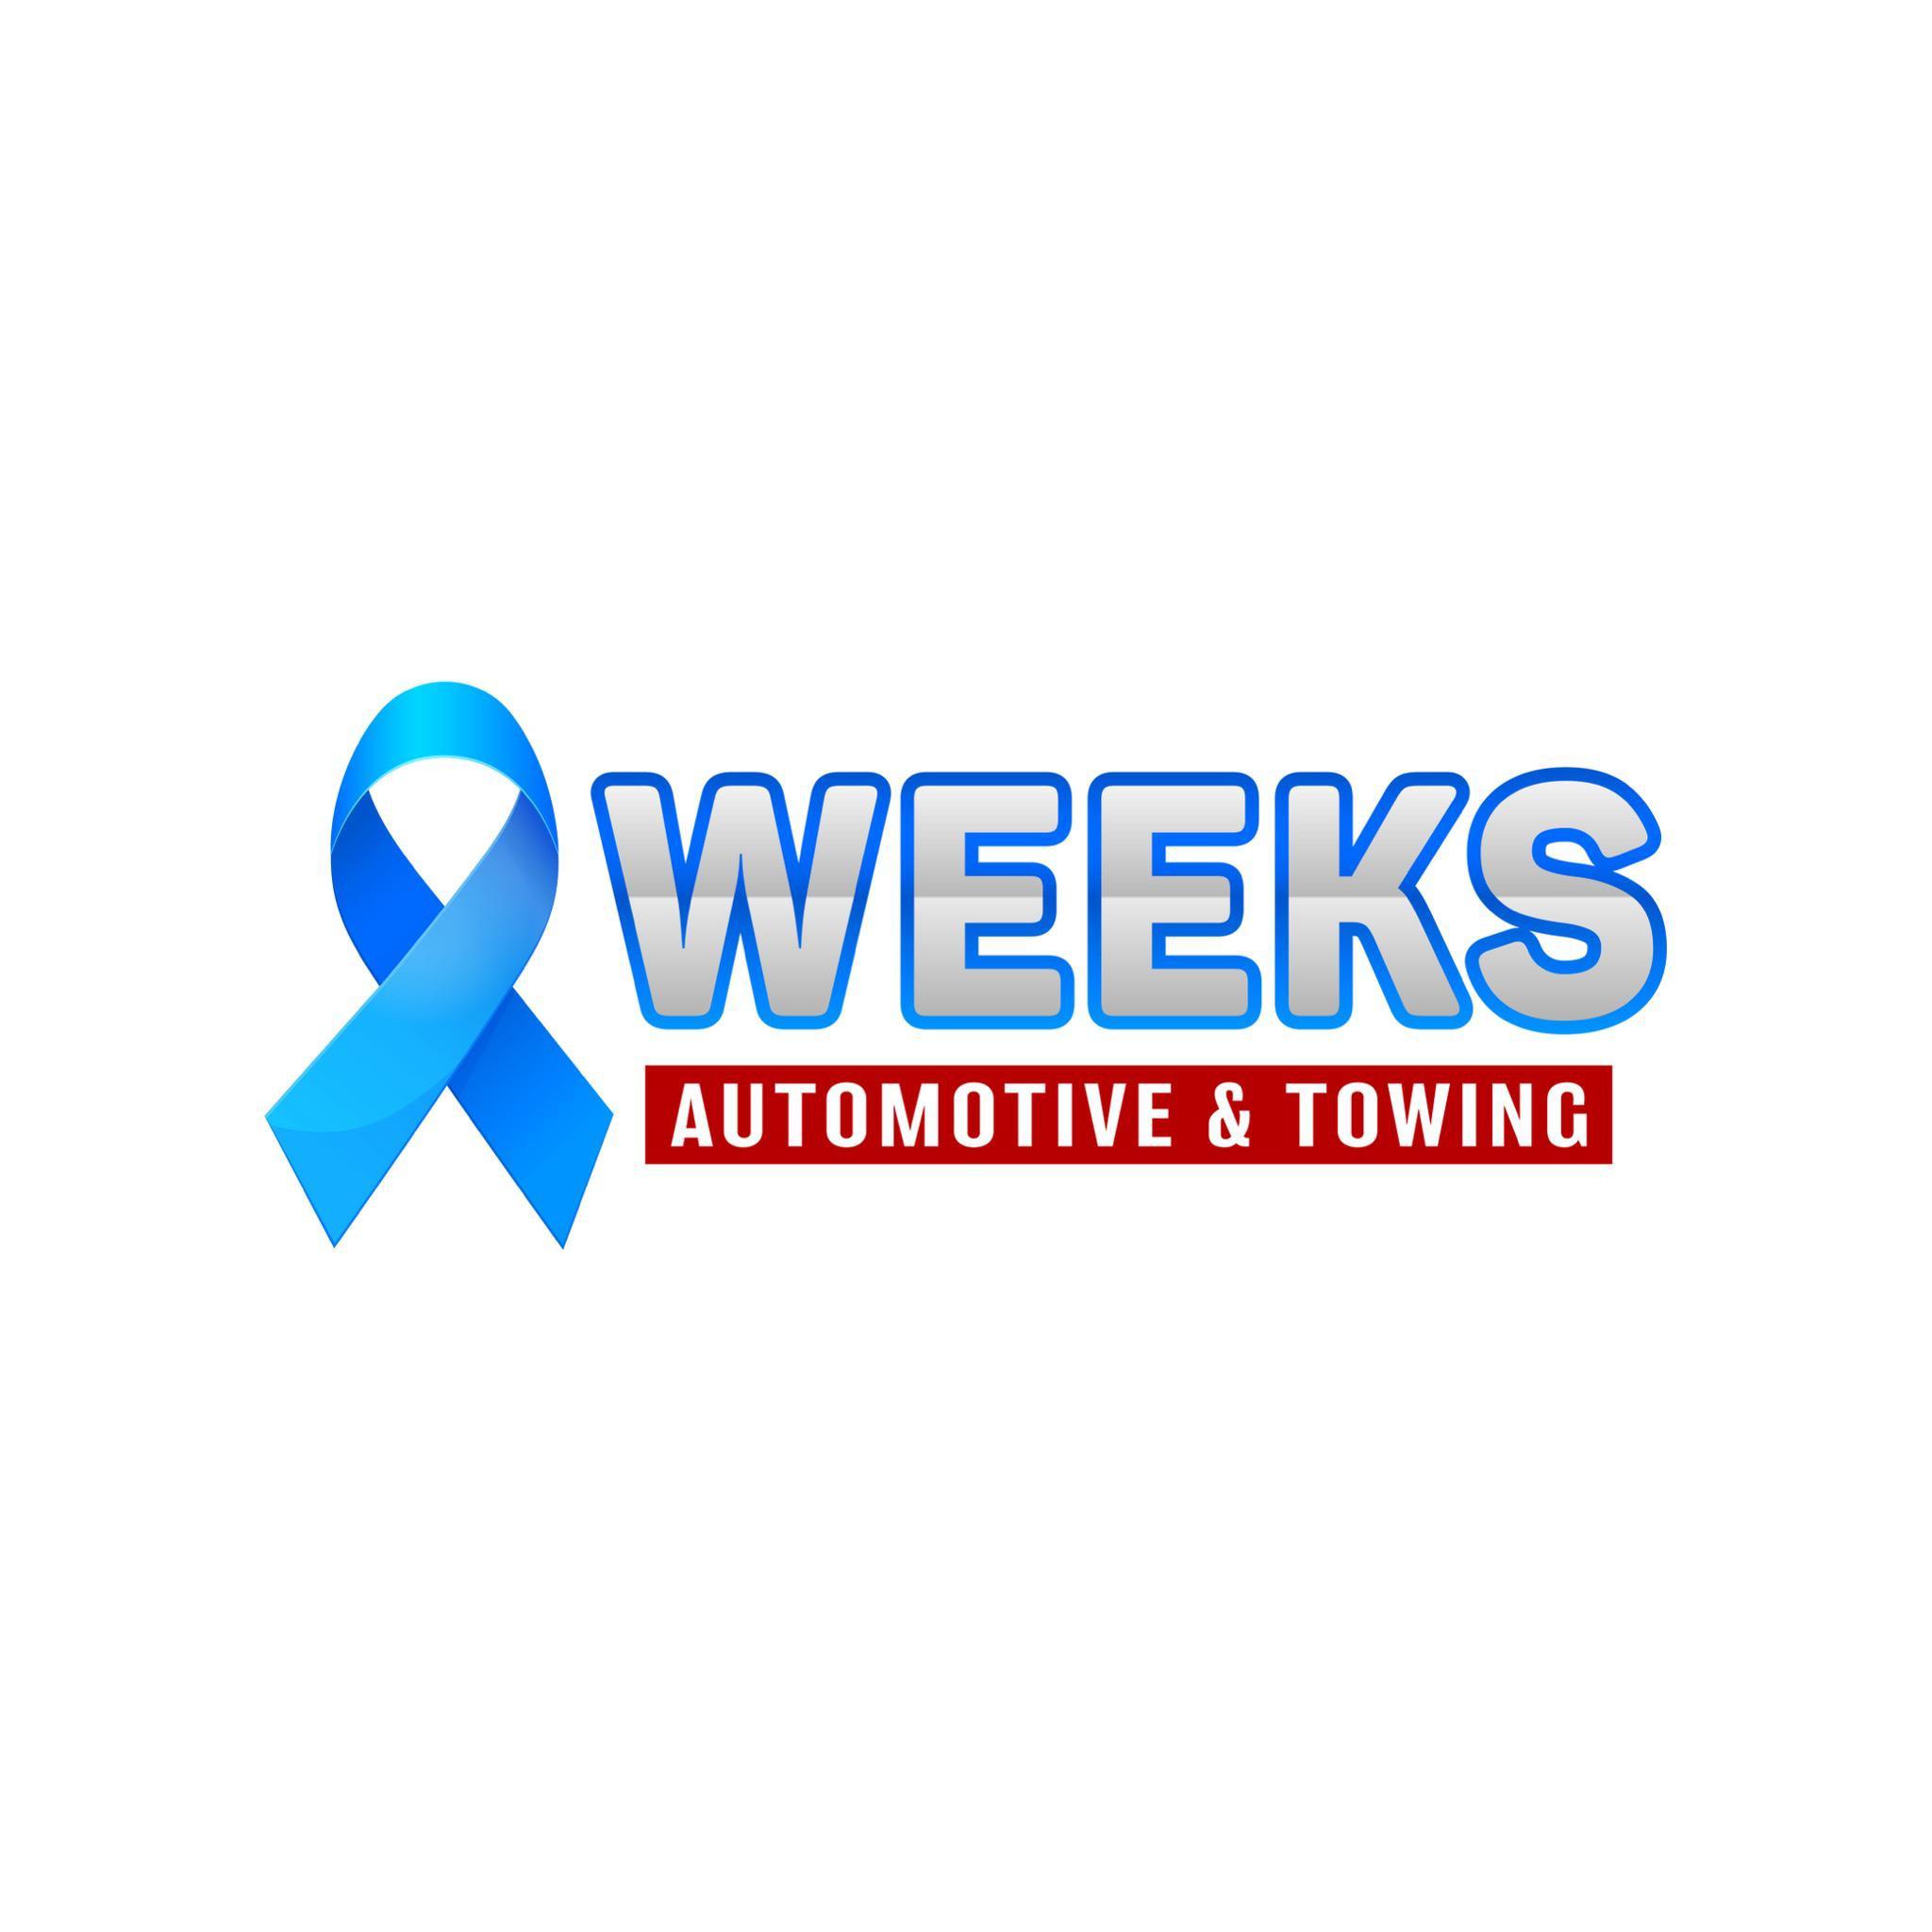 Weeks Automotive & Towing - Terre Hill, PA 17581 - (717)715-3530 | ShowMeLocal.com